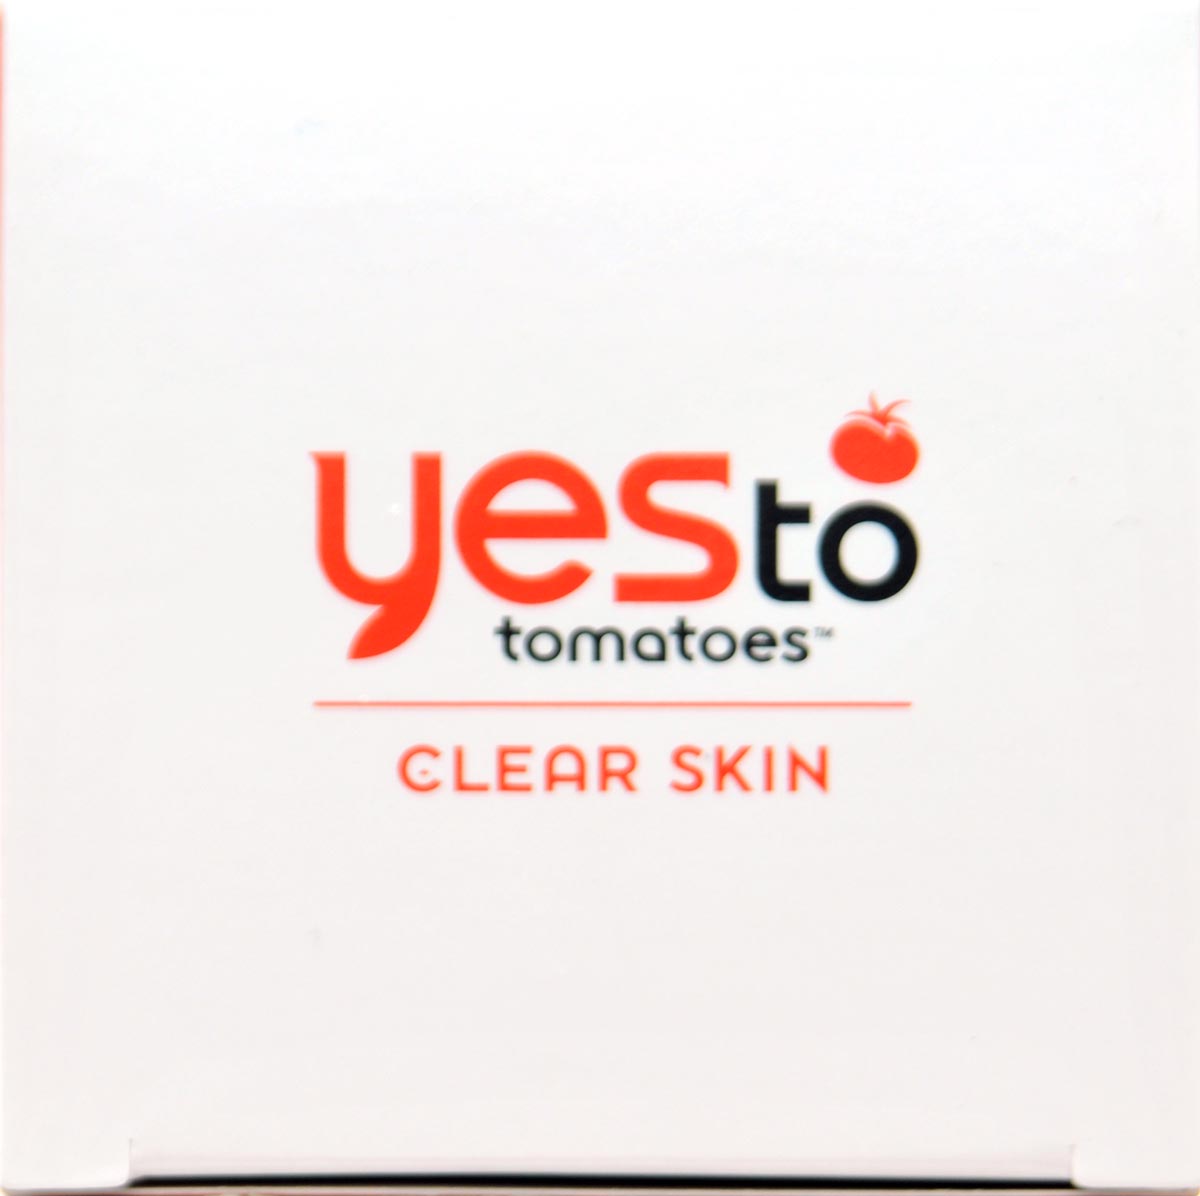 Yes To Yes To Tomatoes Facial Mask 1.7 oz - image 5 of 5